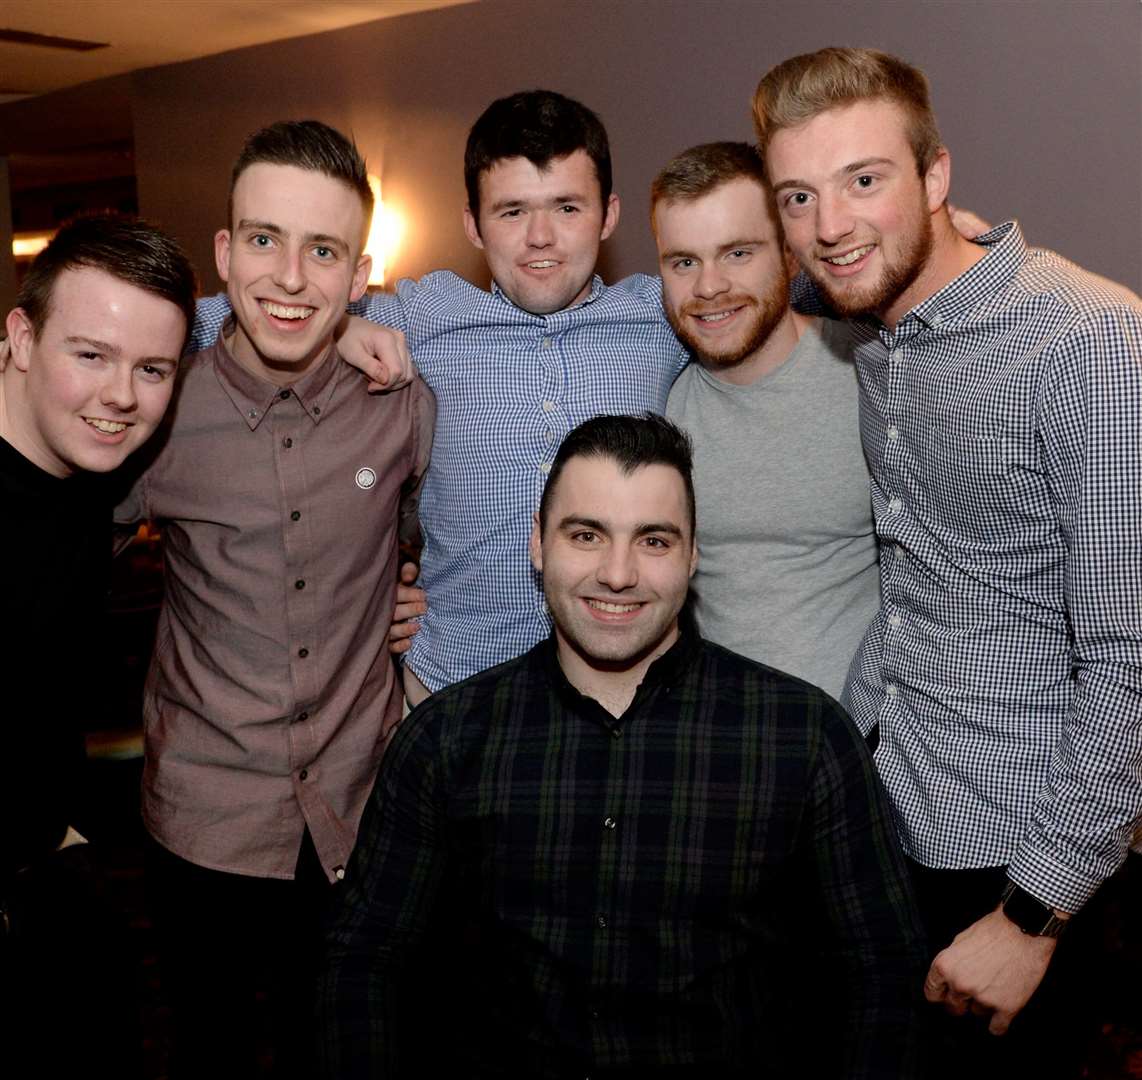 Grant Elder(centre) from Nairn enjoys his 22nd birthday with mates.